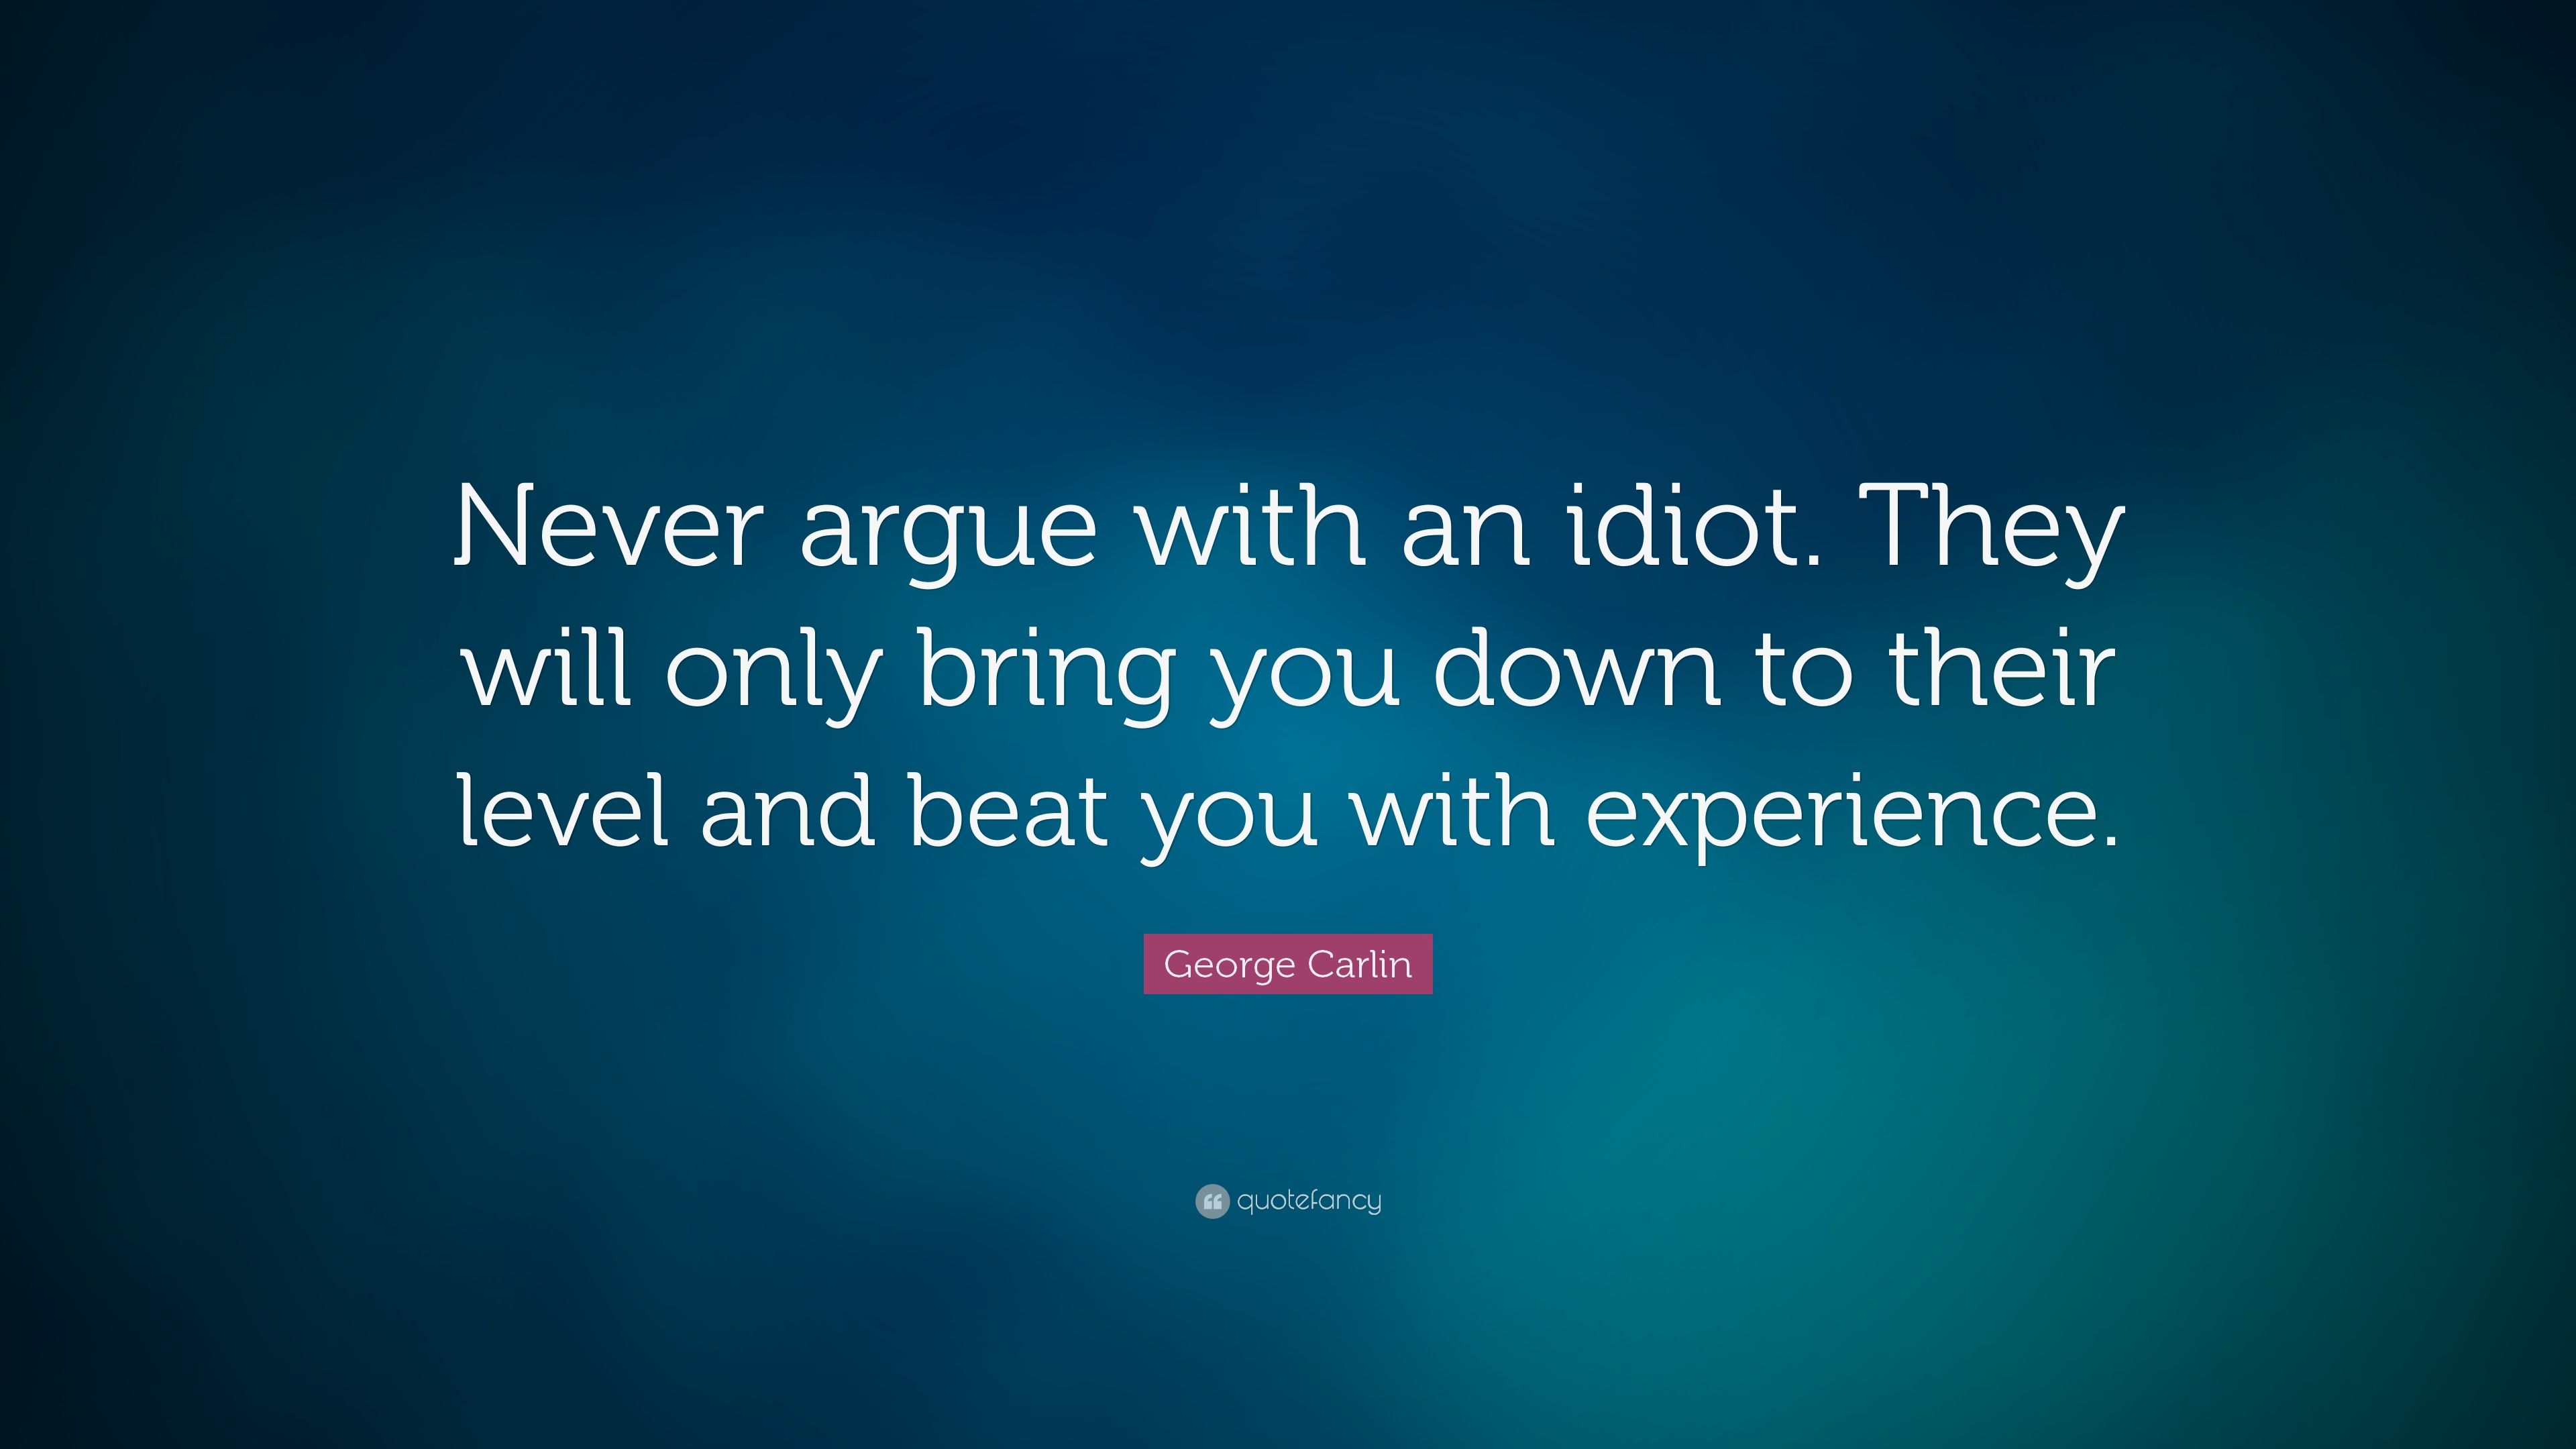 George Carlin Quote: “Never argue with an idiot. They will only